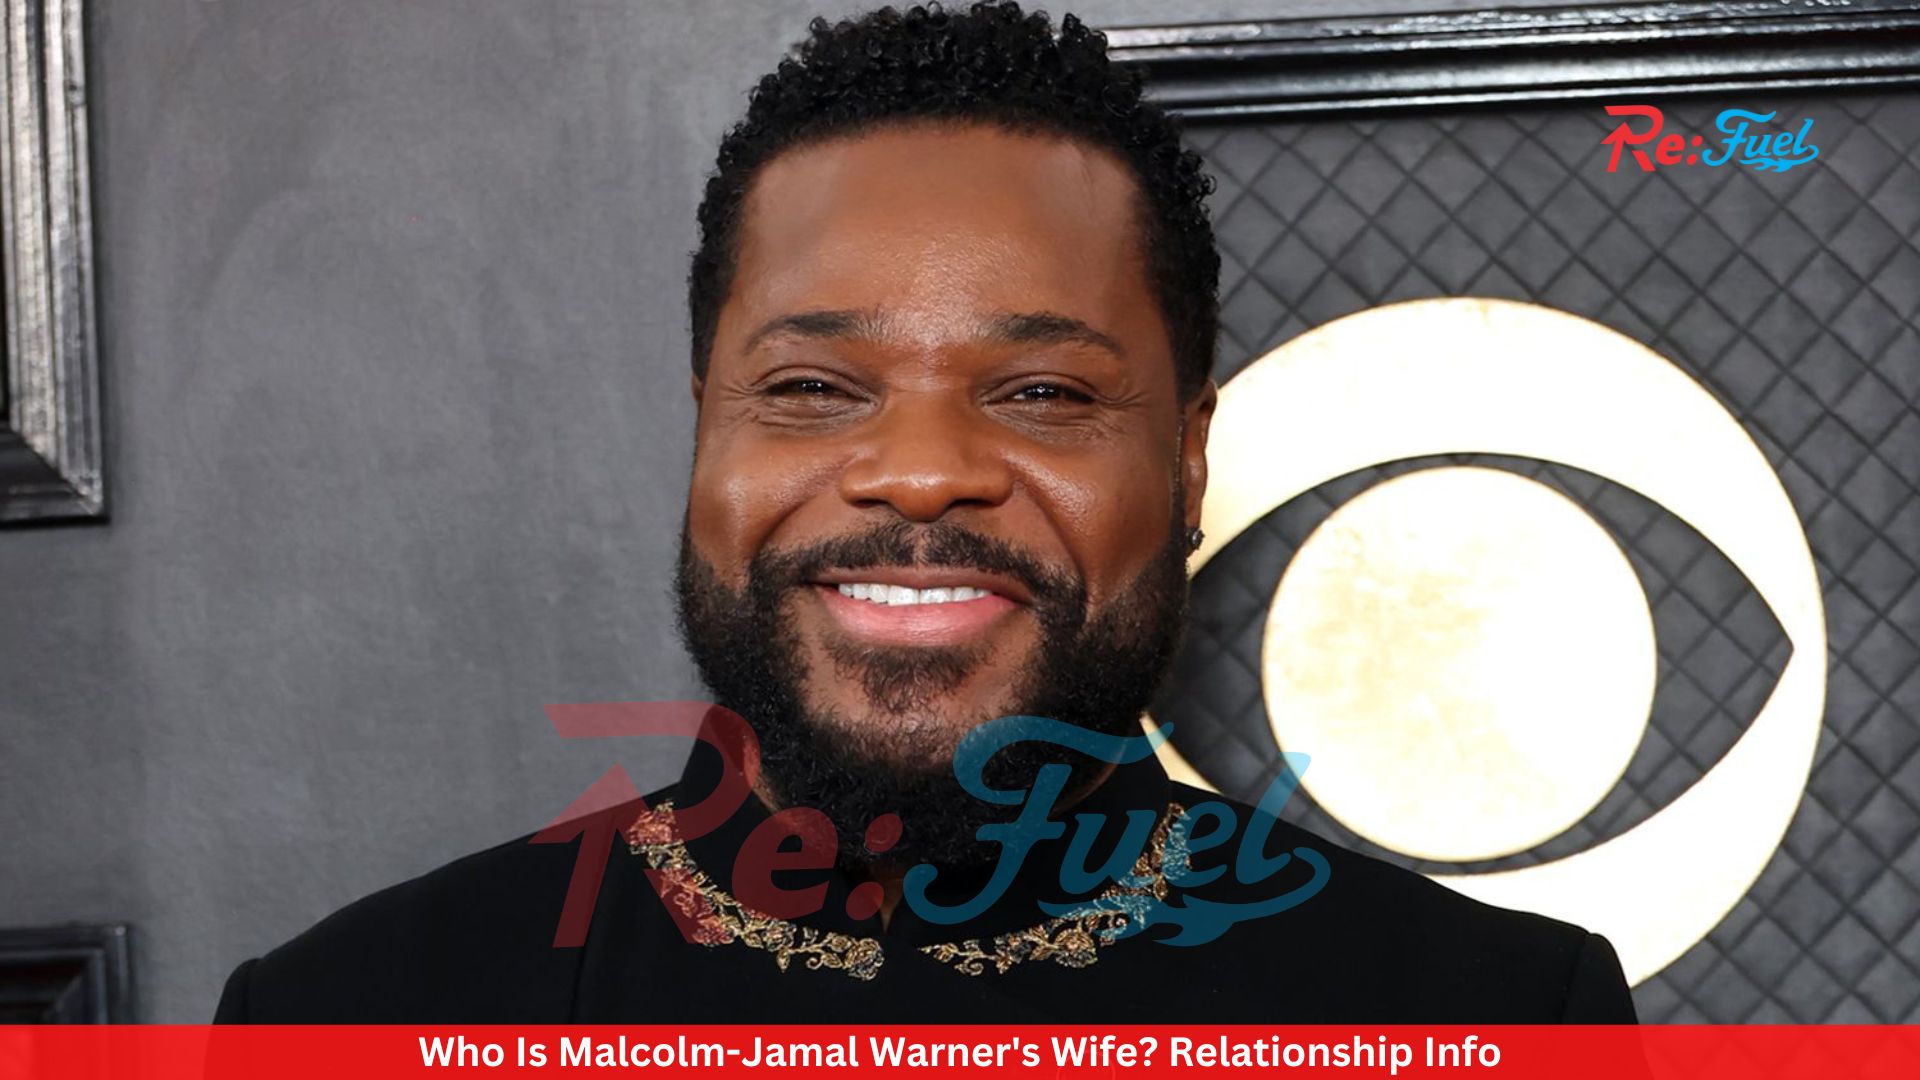 Who Is Malcolm-Jamal Warner's Wife? Relationship Info